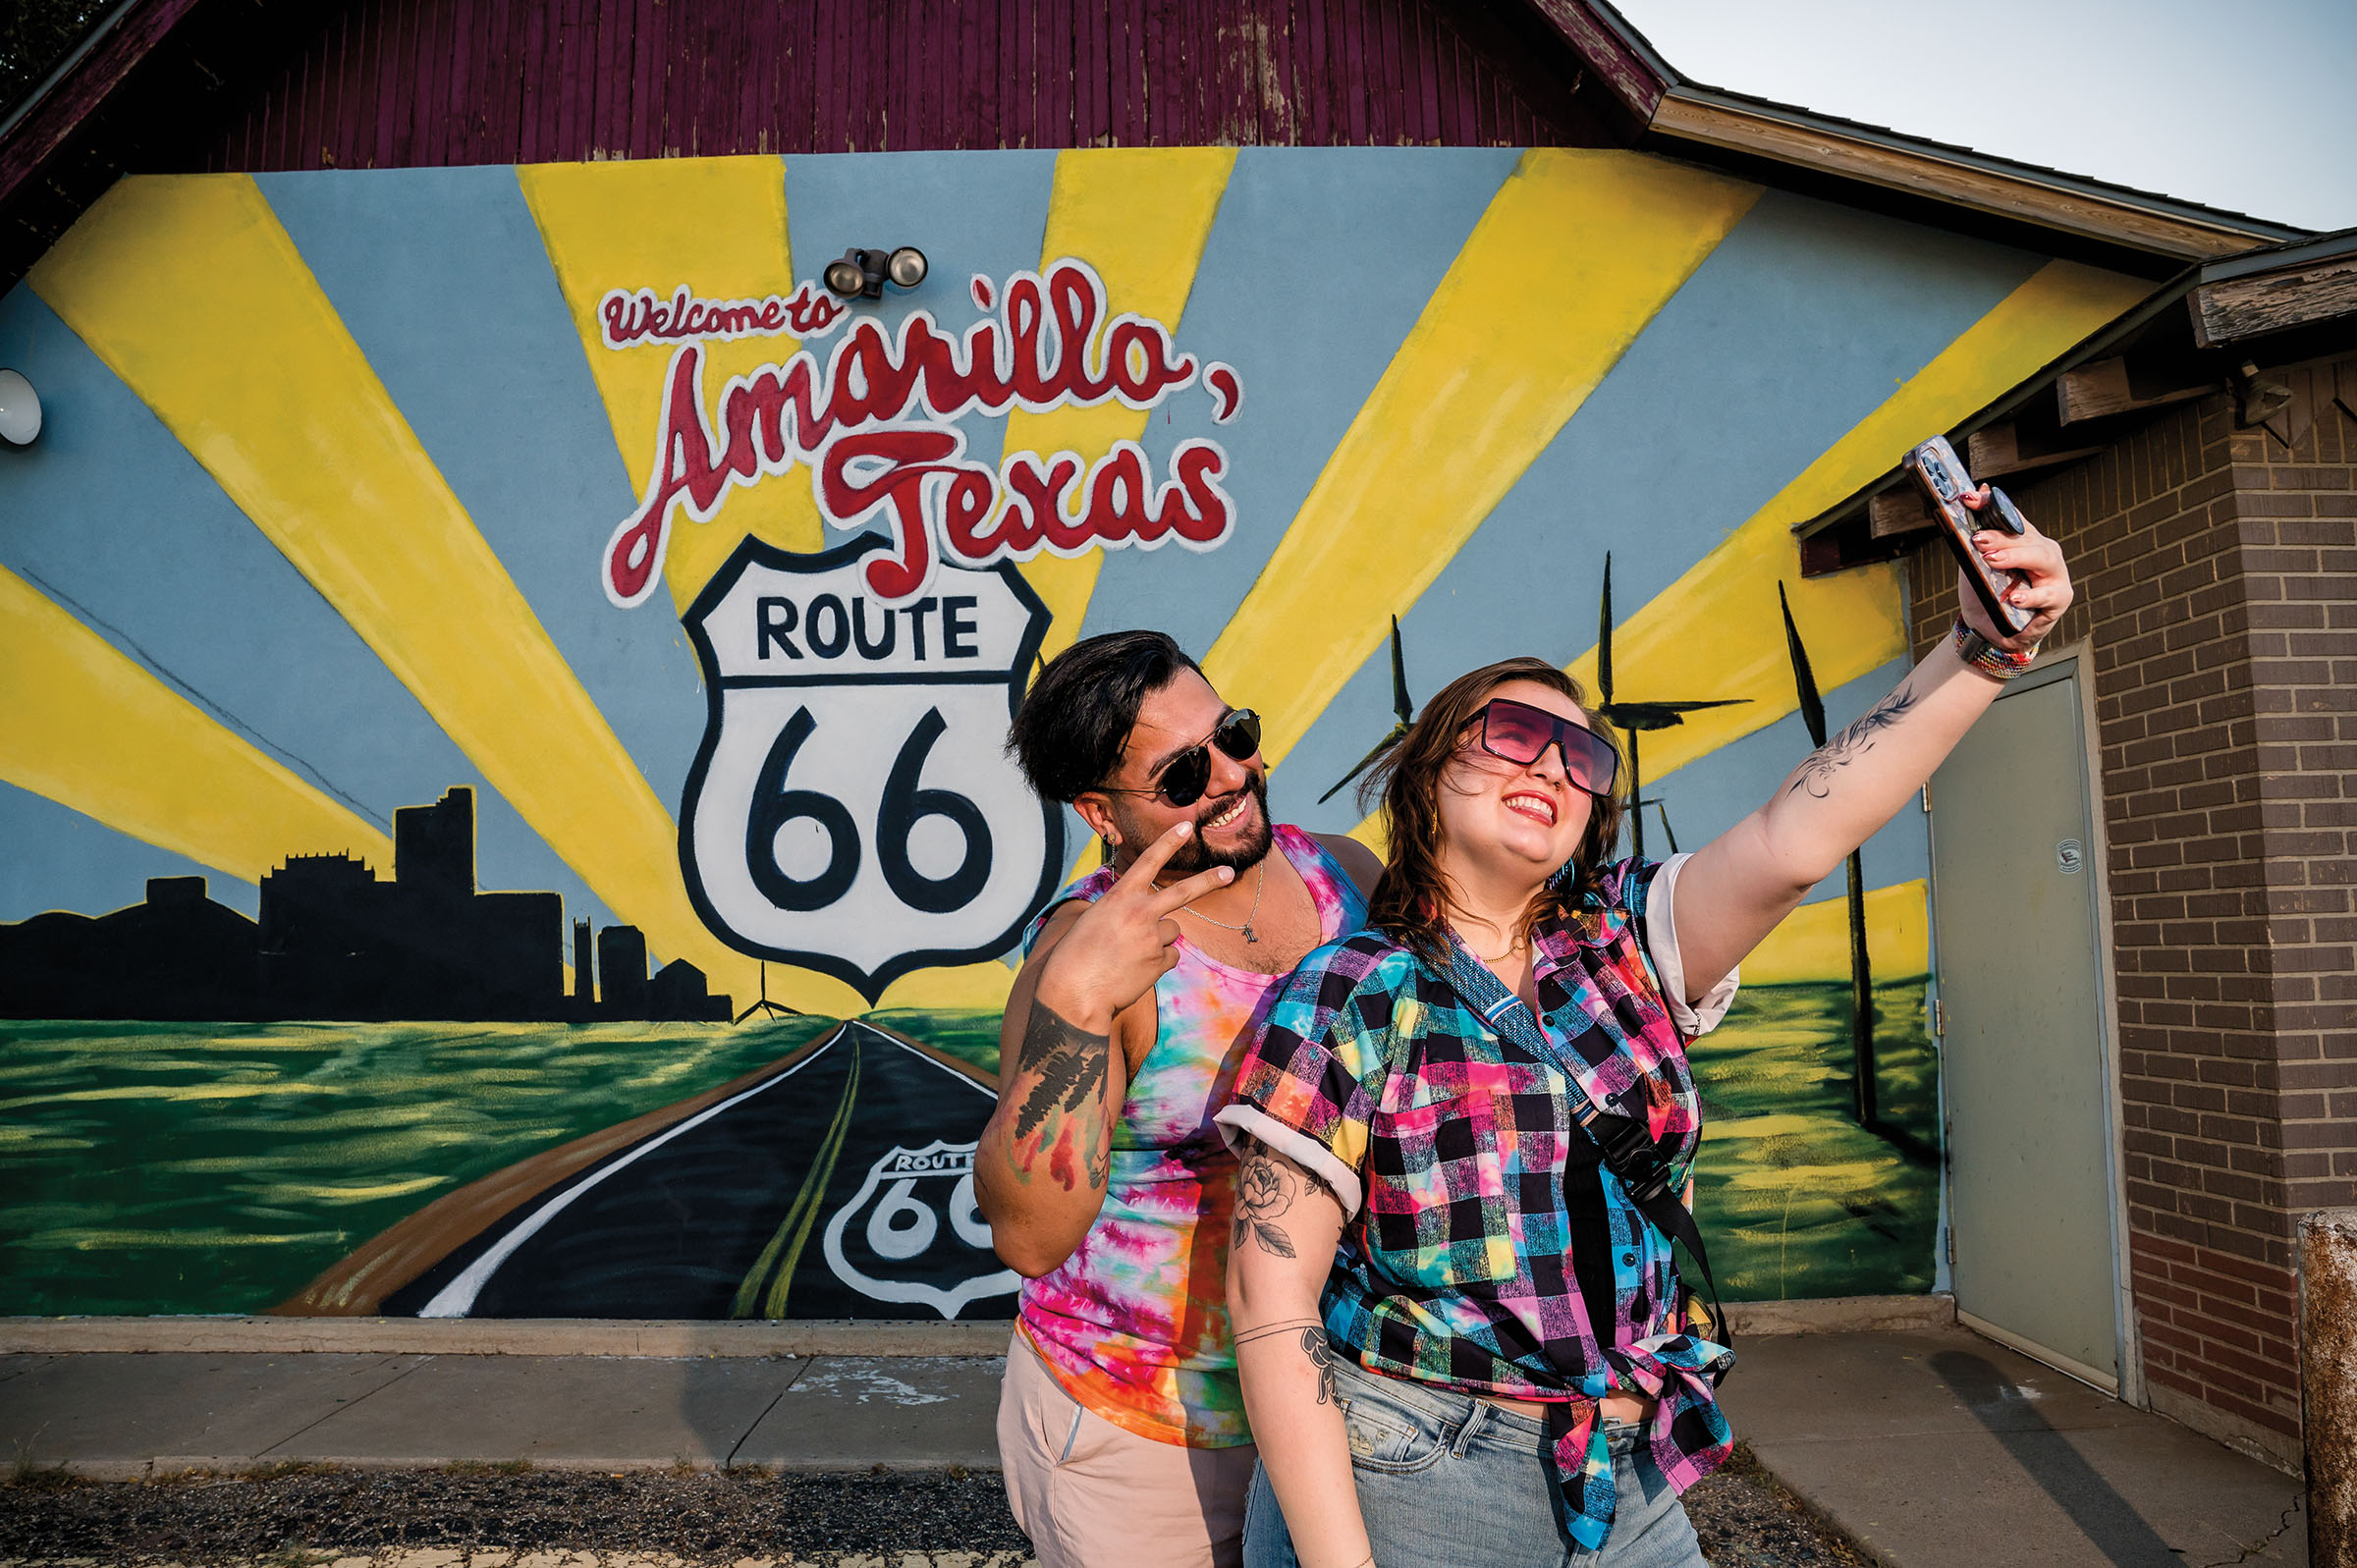 Two people in brightly-colored shirts pose for a selfie in front of a mural reading "Welcome to Amarillo, Texas"